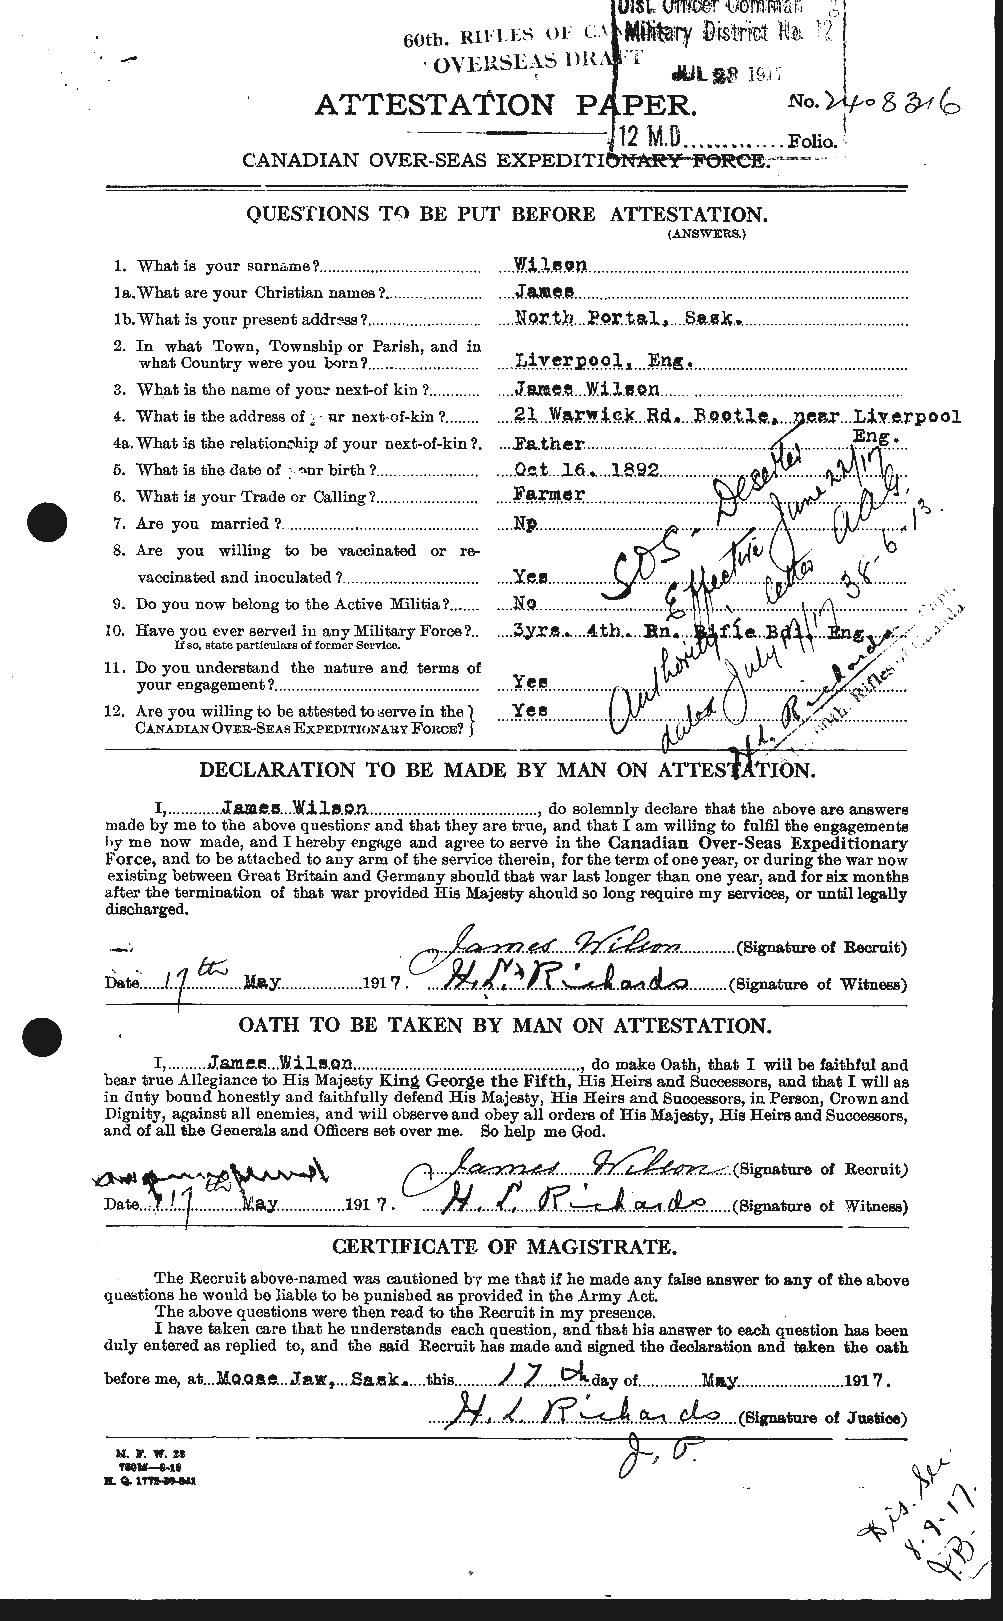 Personnel Records of the First World War - CEF 681349a